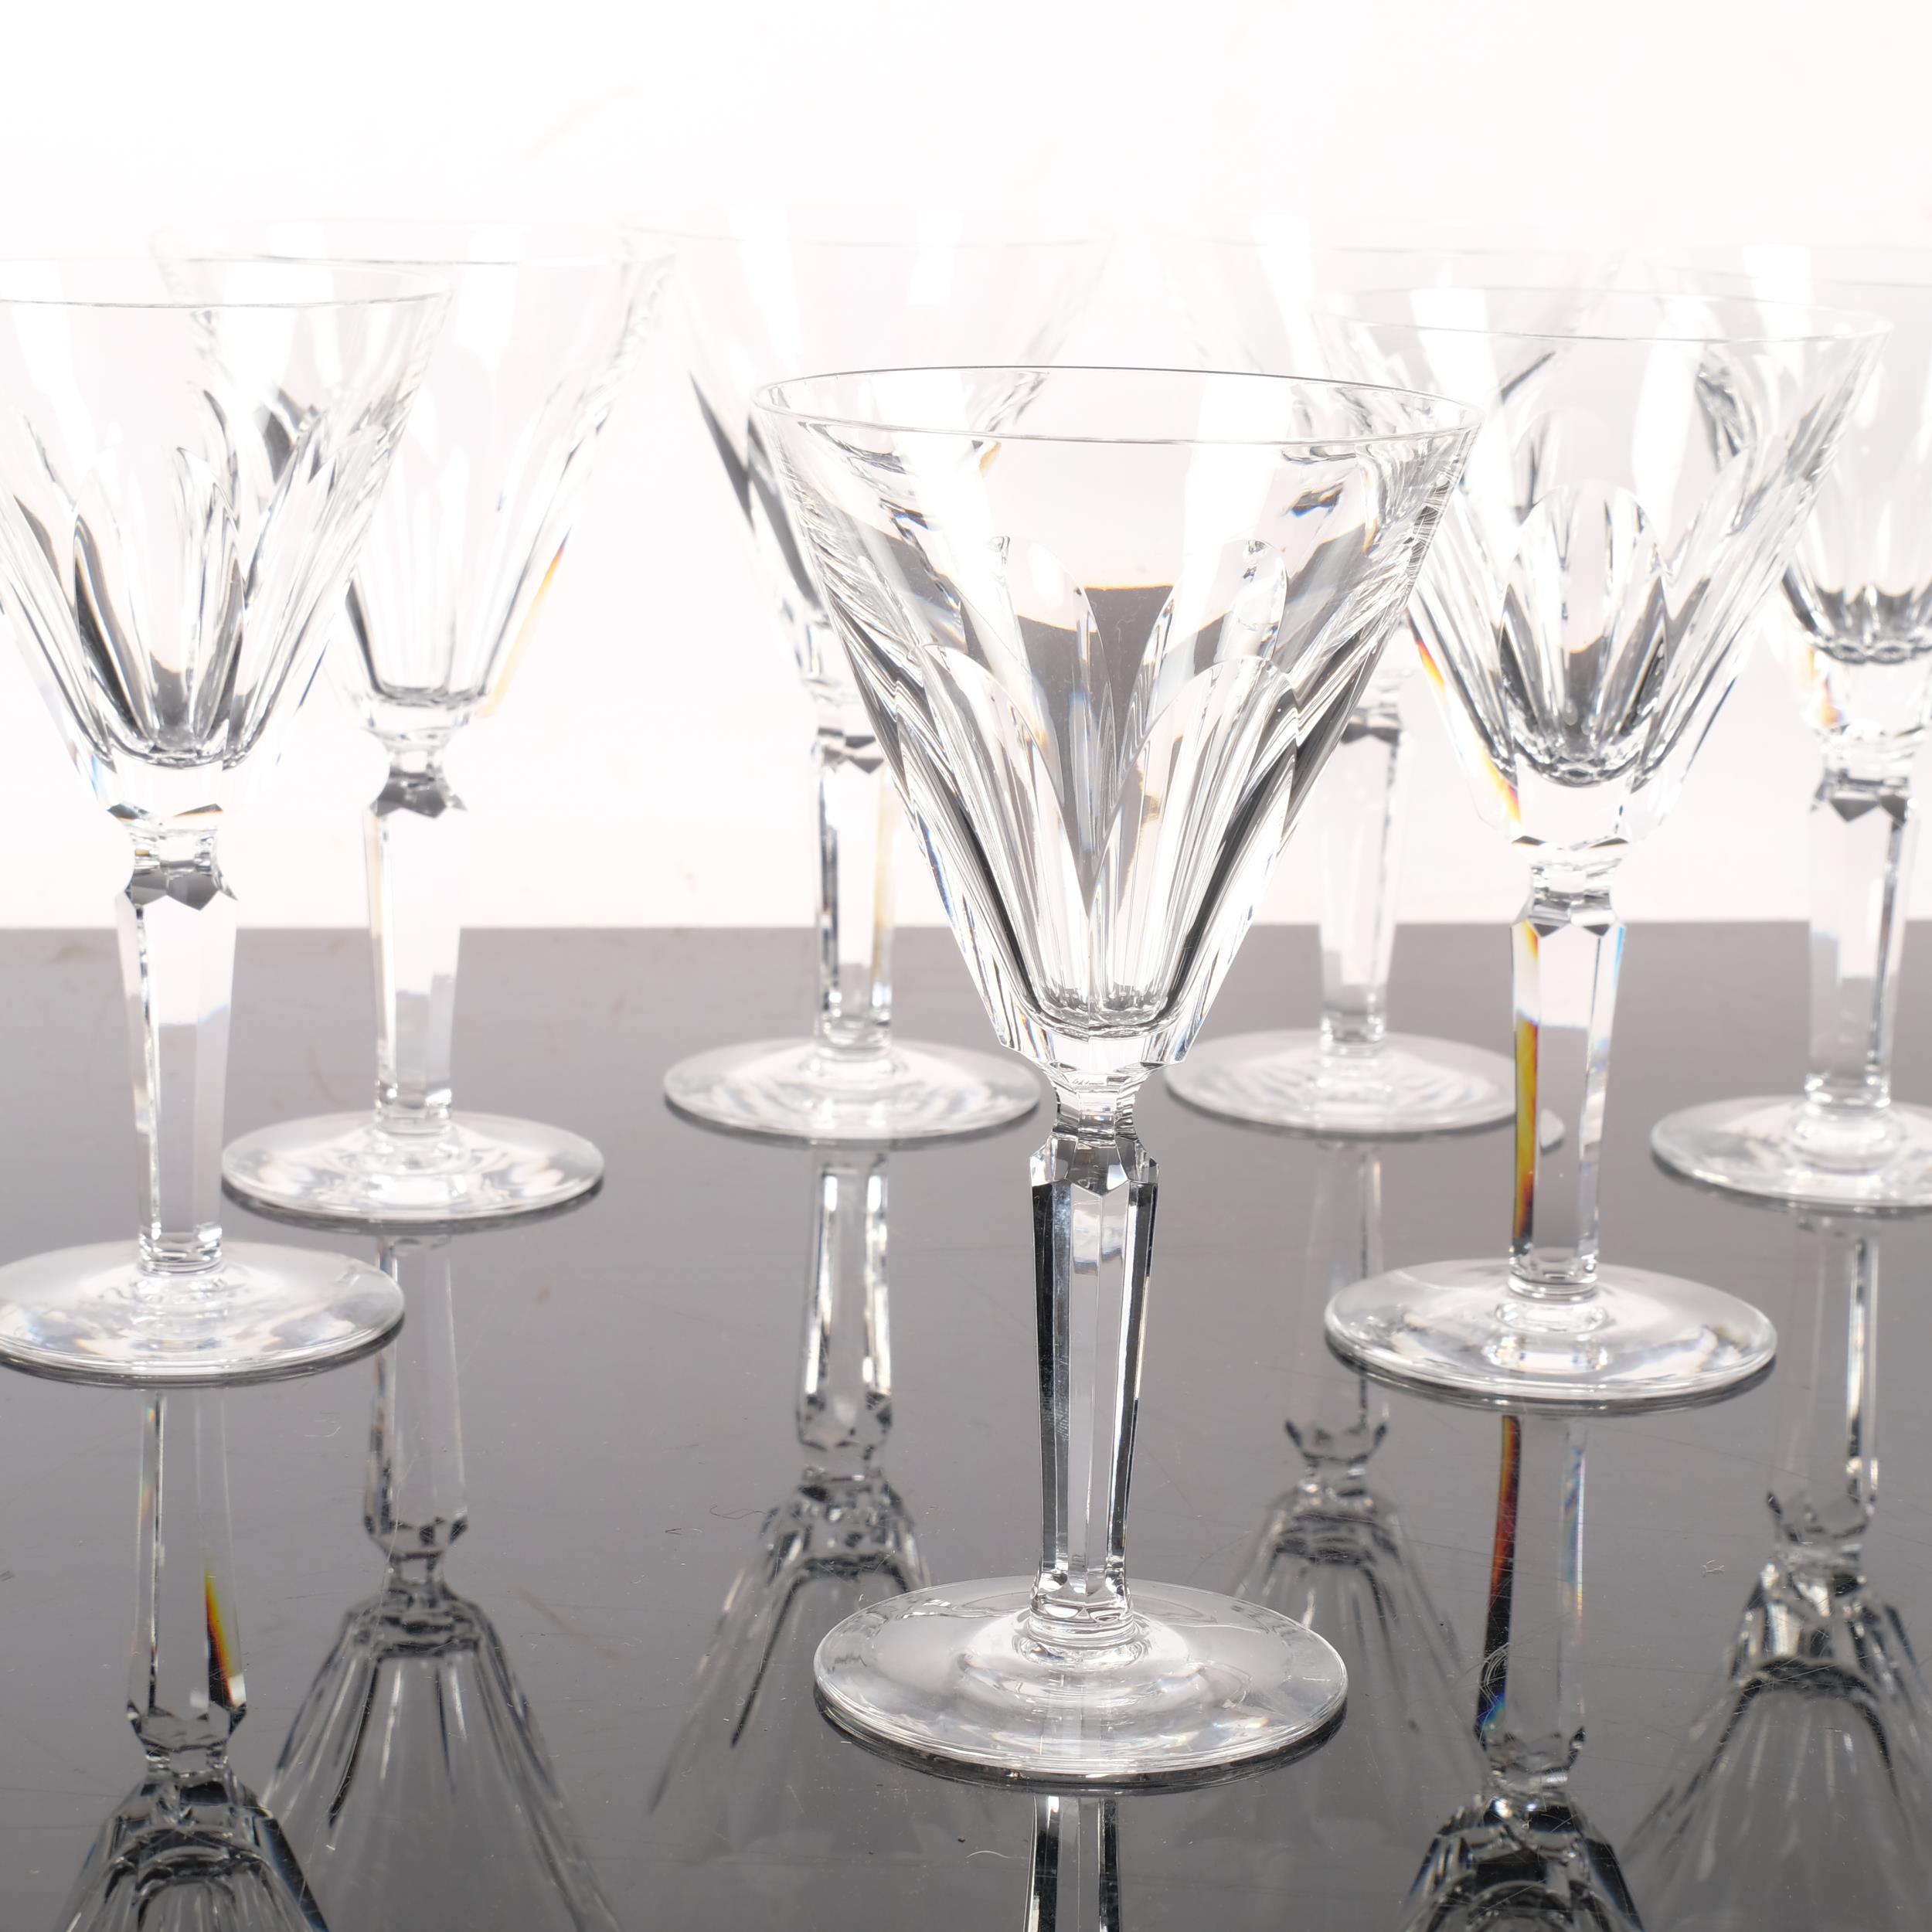 A set of 8 Waterford Crystal Sheila pattern wine glasses, H16.5cm - Image 2 of 2